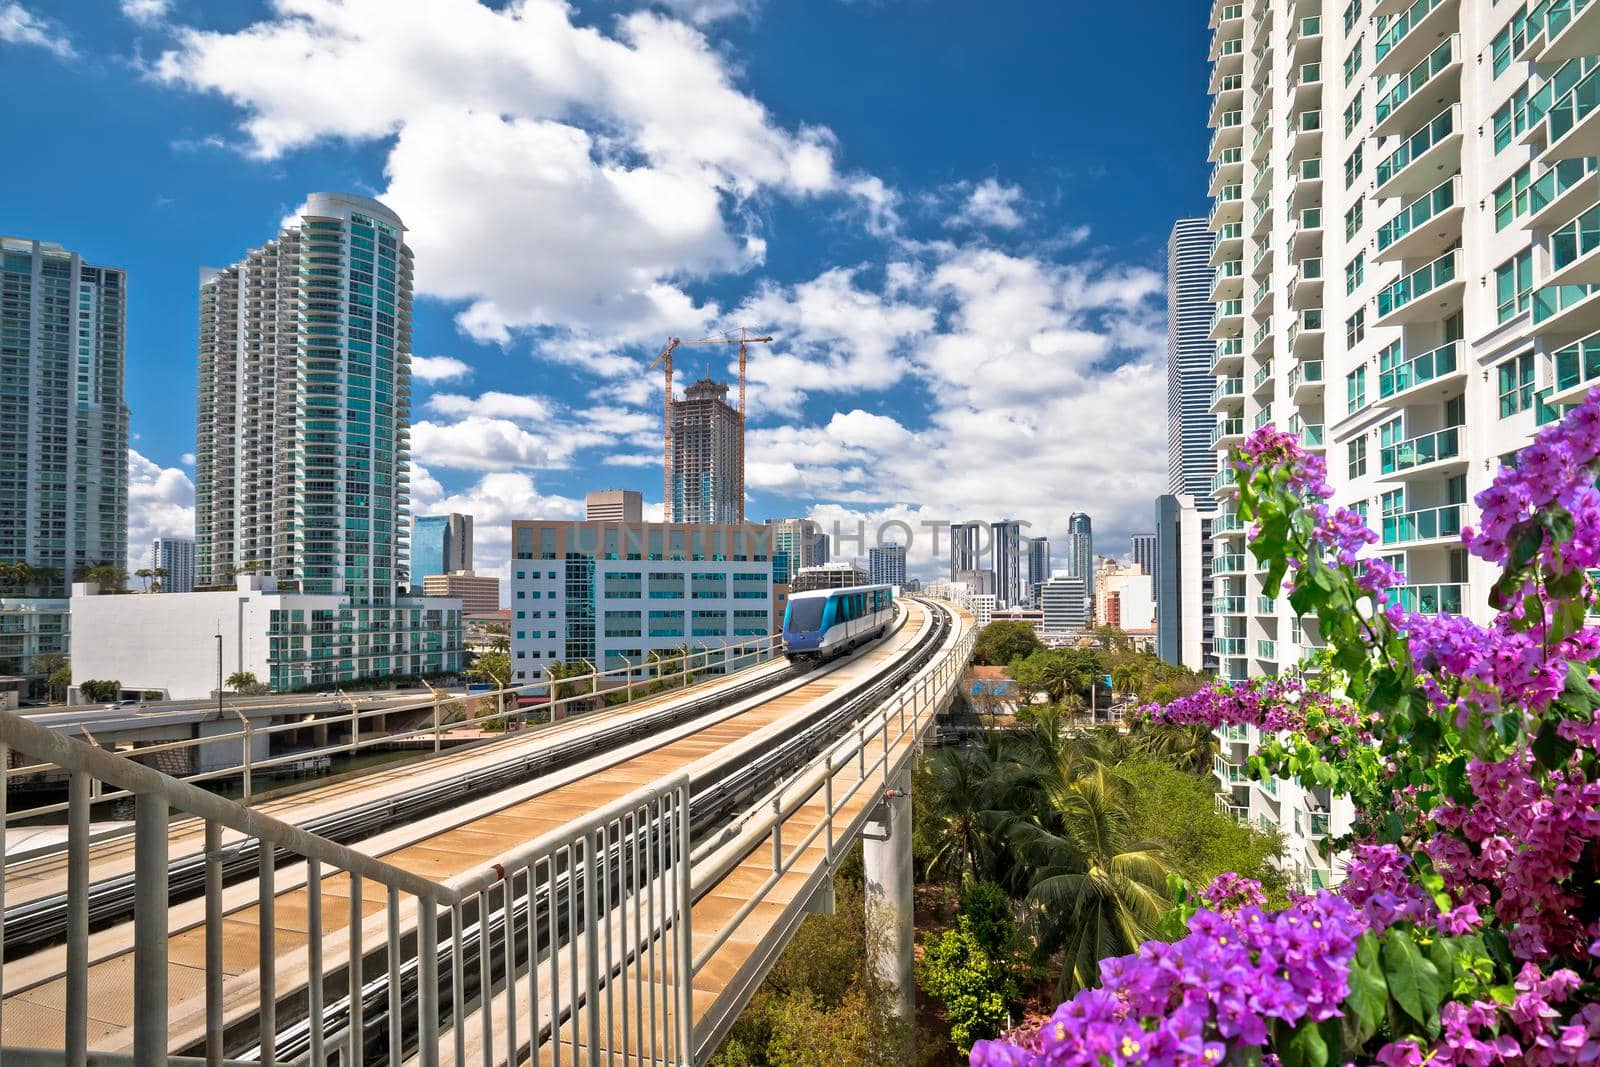 Miami downtown skyline and futuristic mover train colorful view by xbrchx